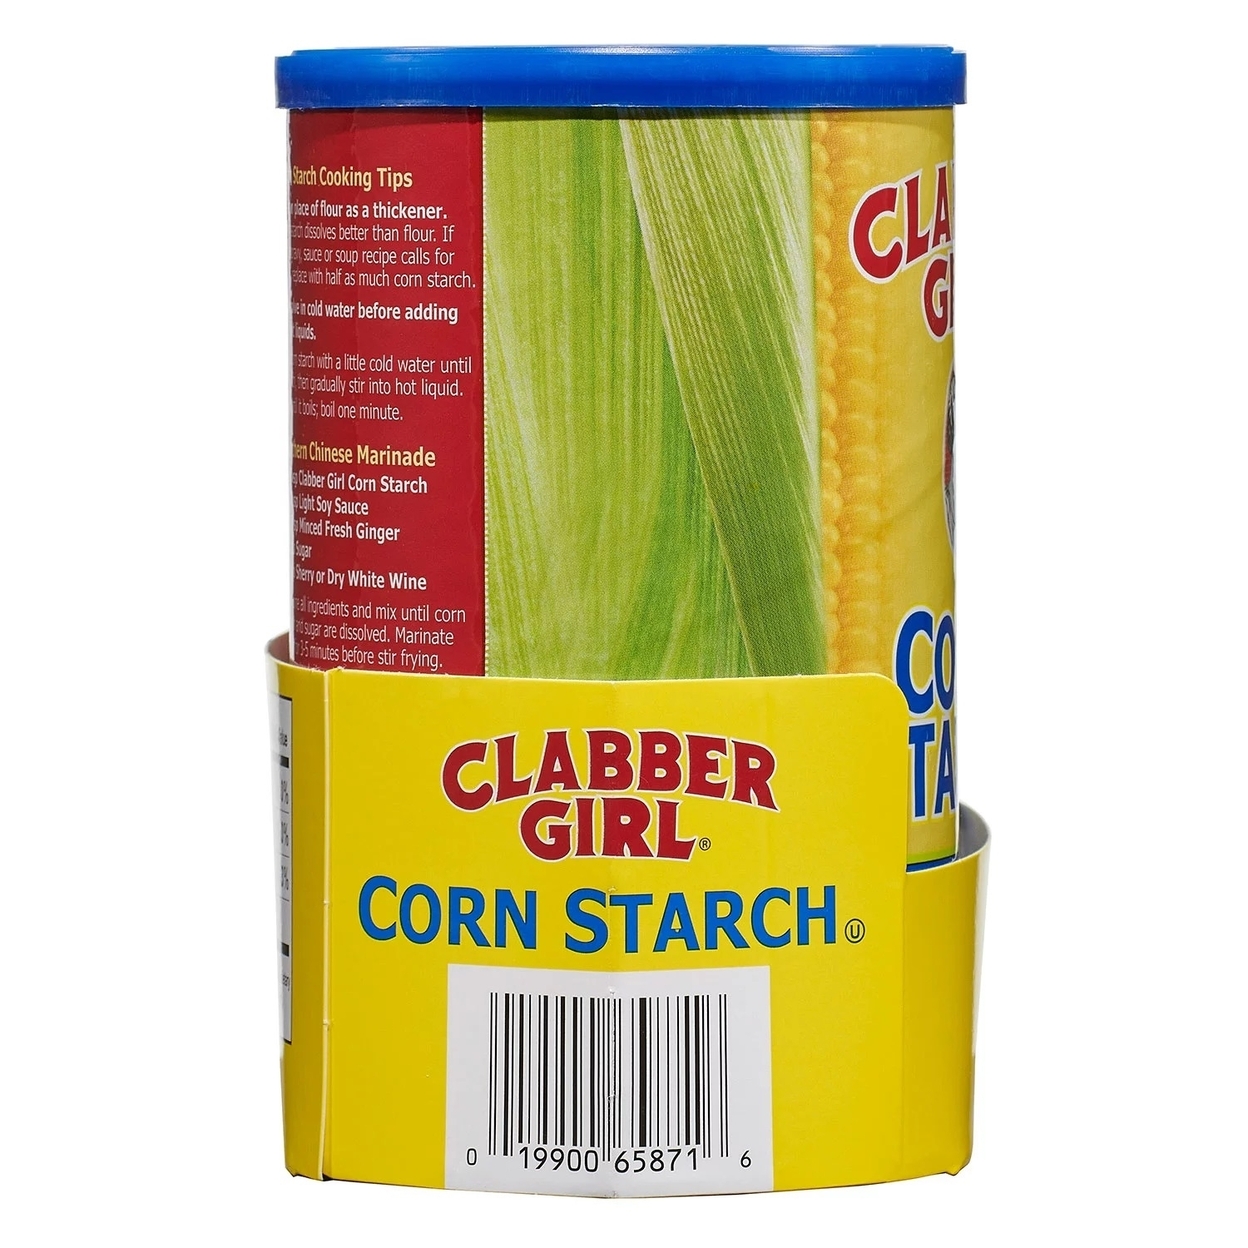 Clabber Girl Corn Starch, 16 Ounce (Pack Of 2)